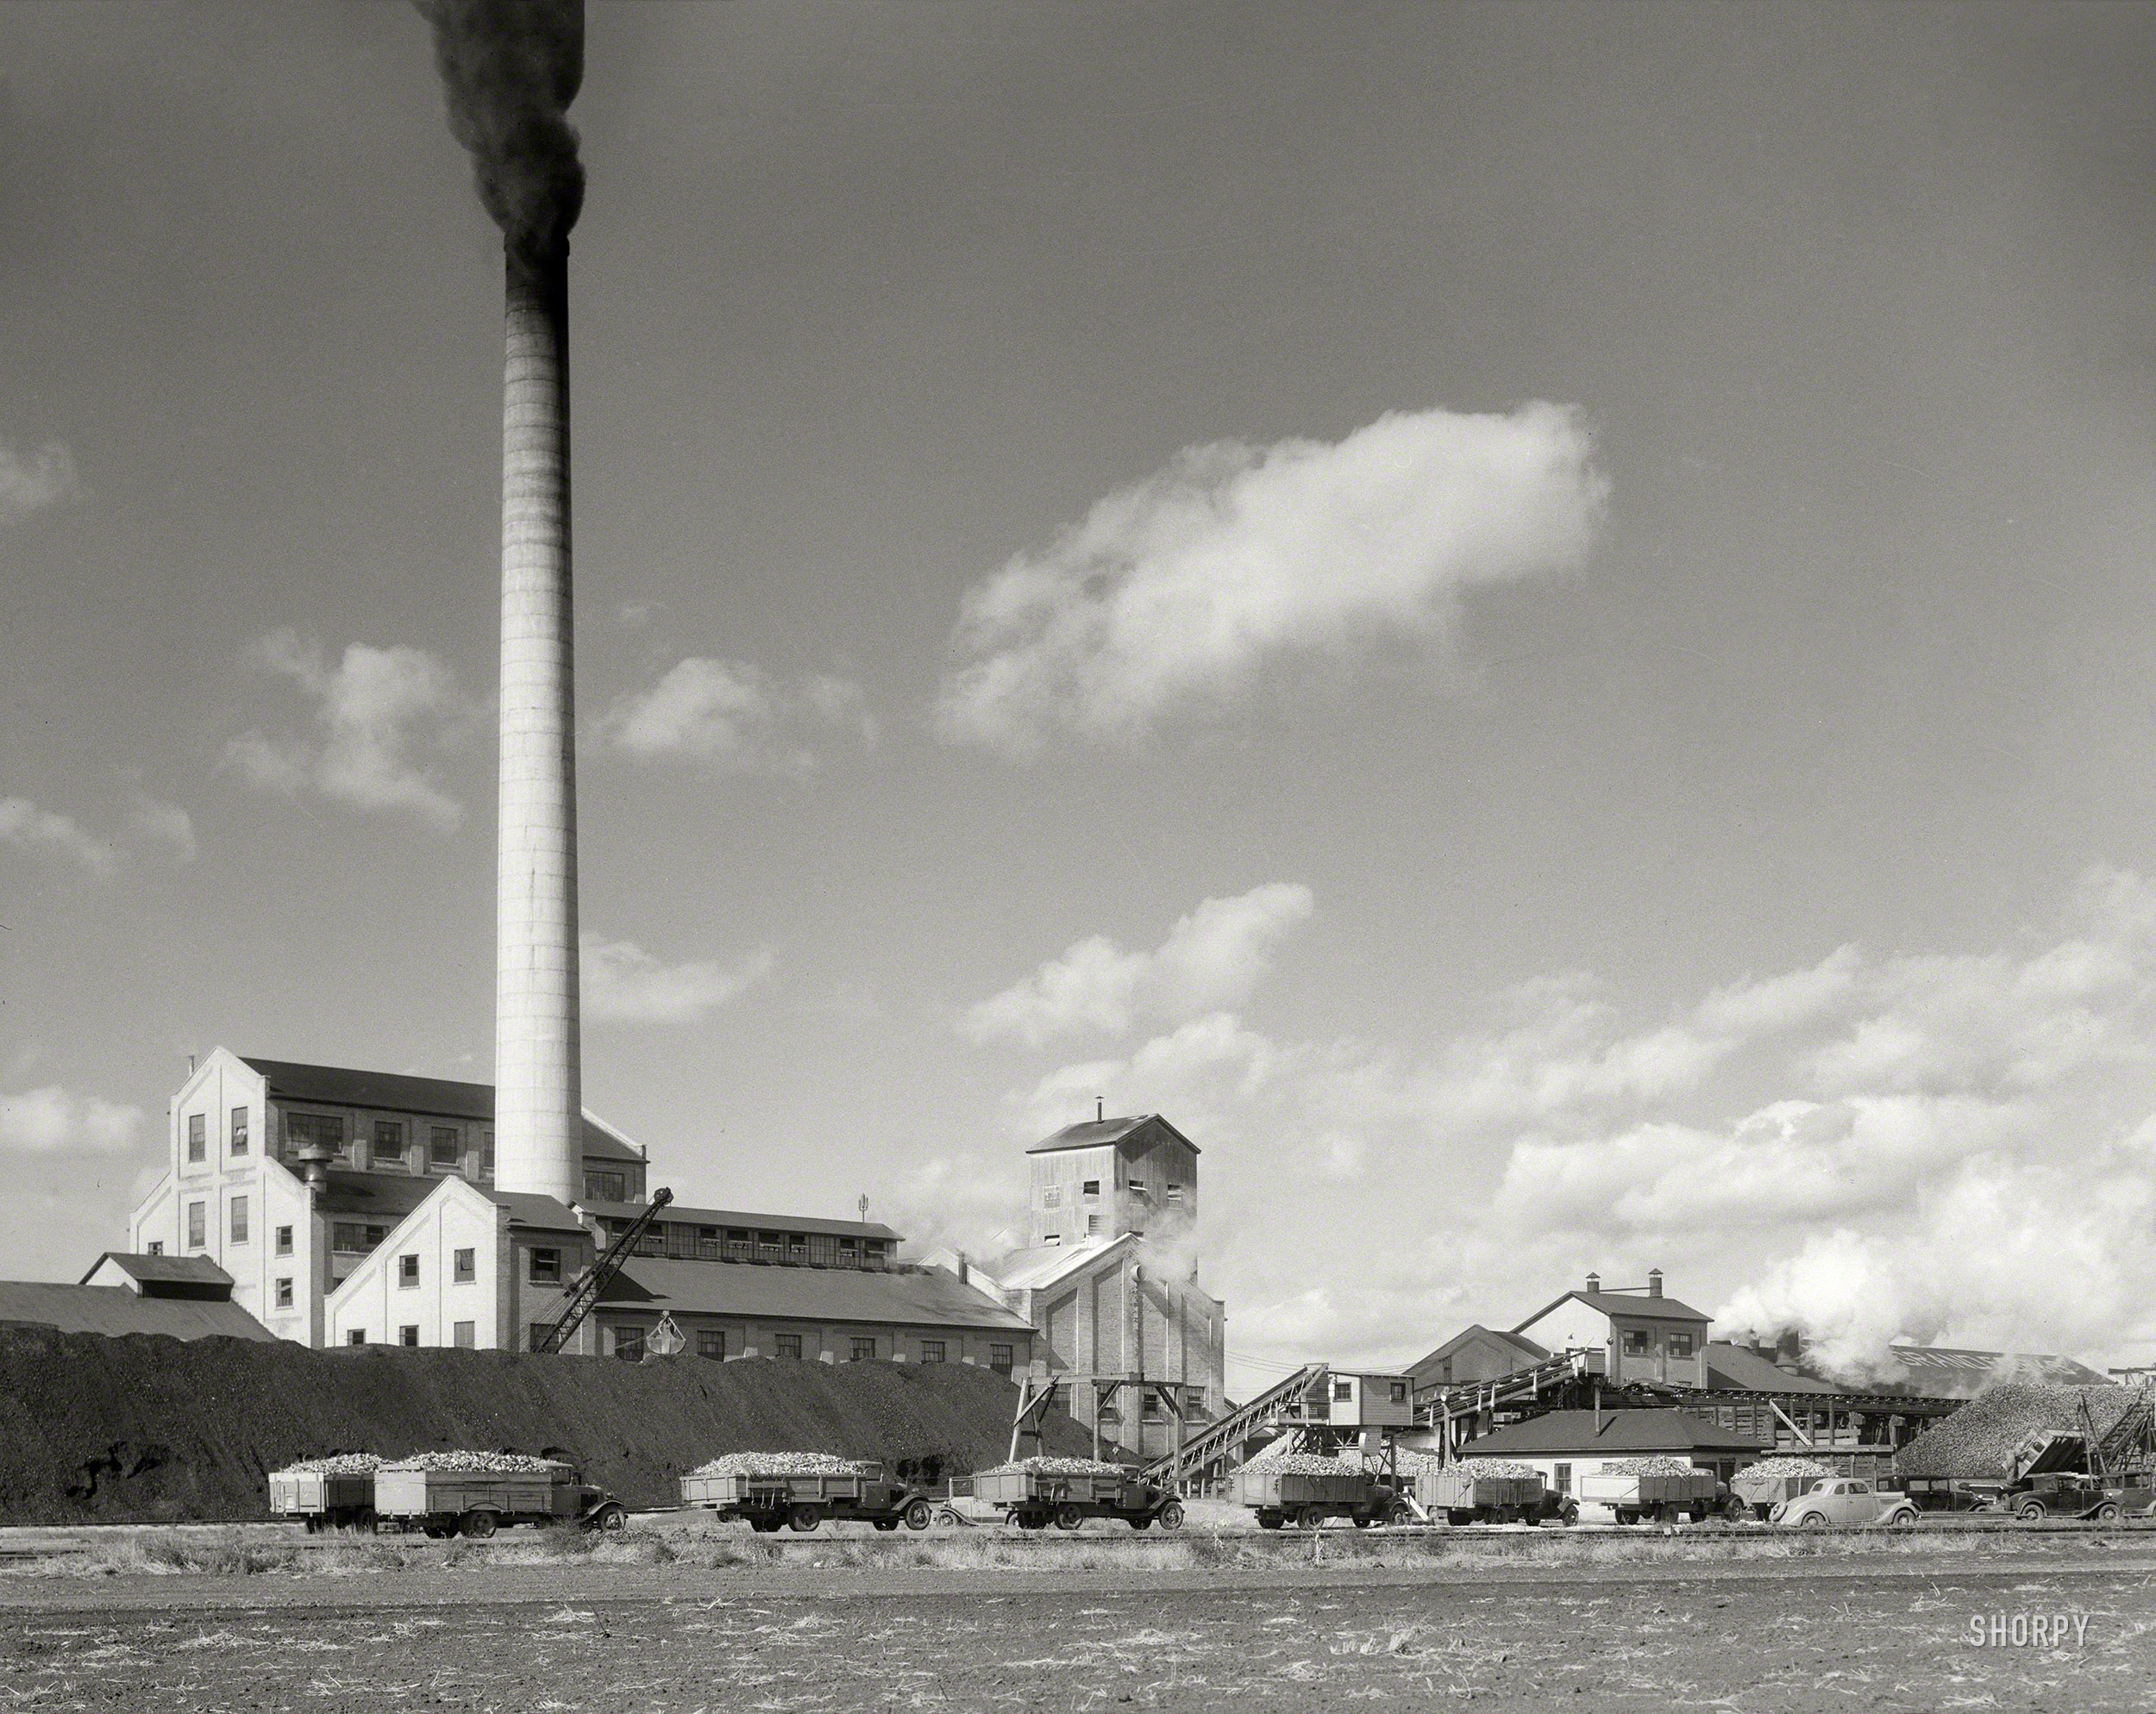 October 1937. "Sugar beet factory with trucks lined up waiting to be unloaded. East Grand Forks, Minnesota." Photo by Russell Lee for the FSA. View full size.